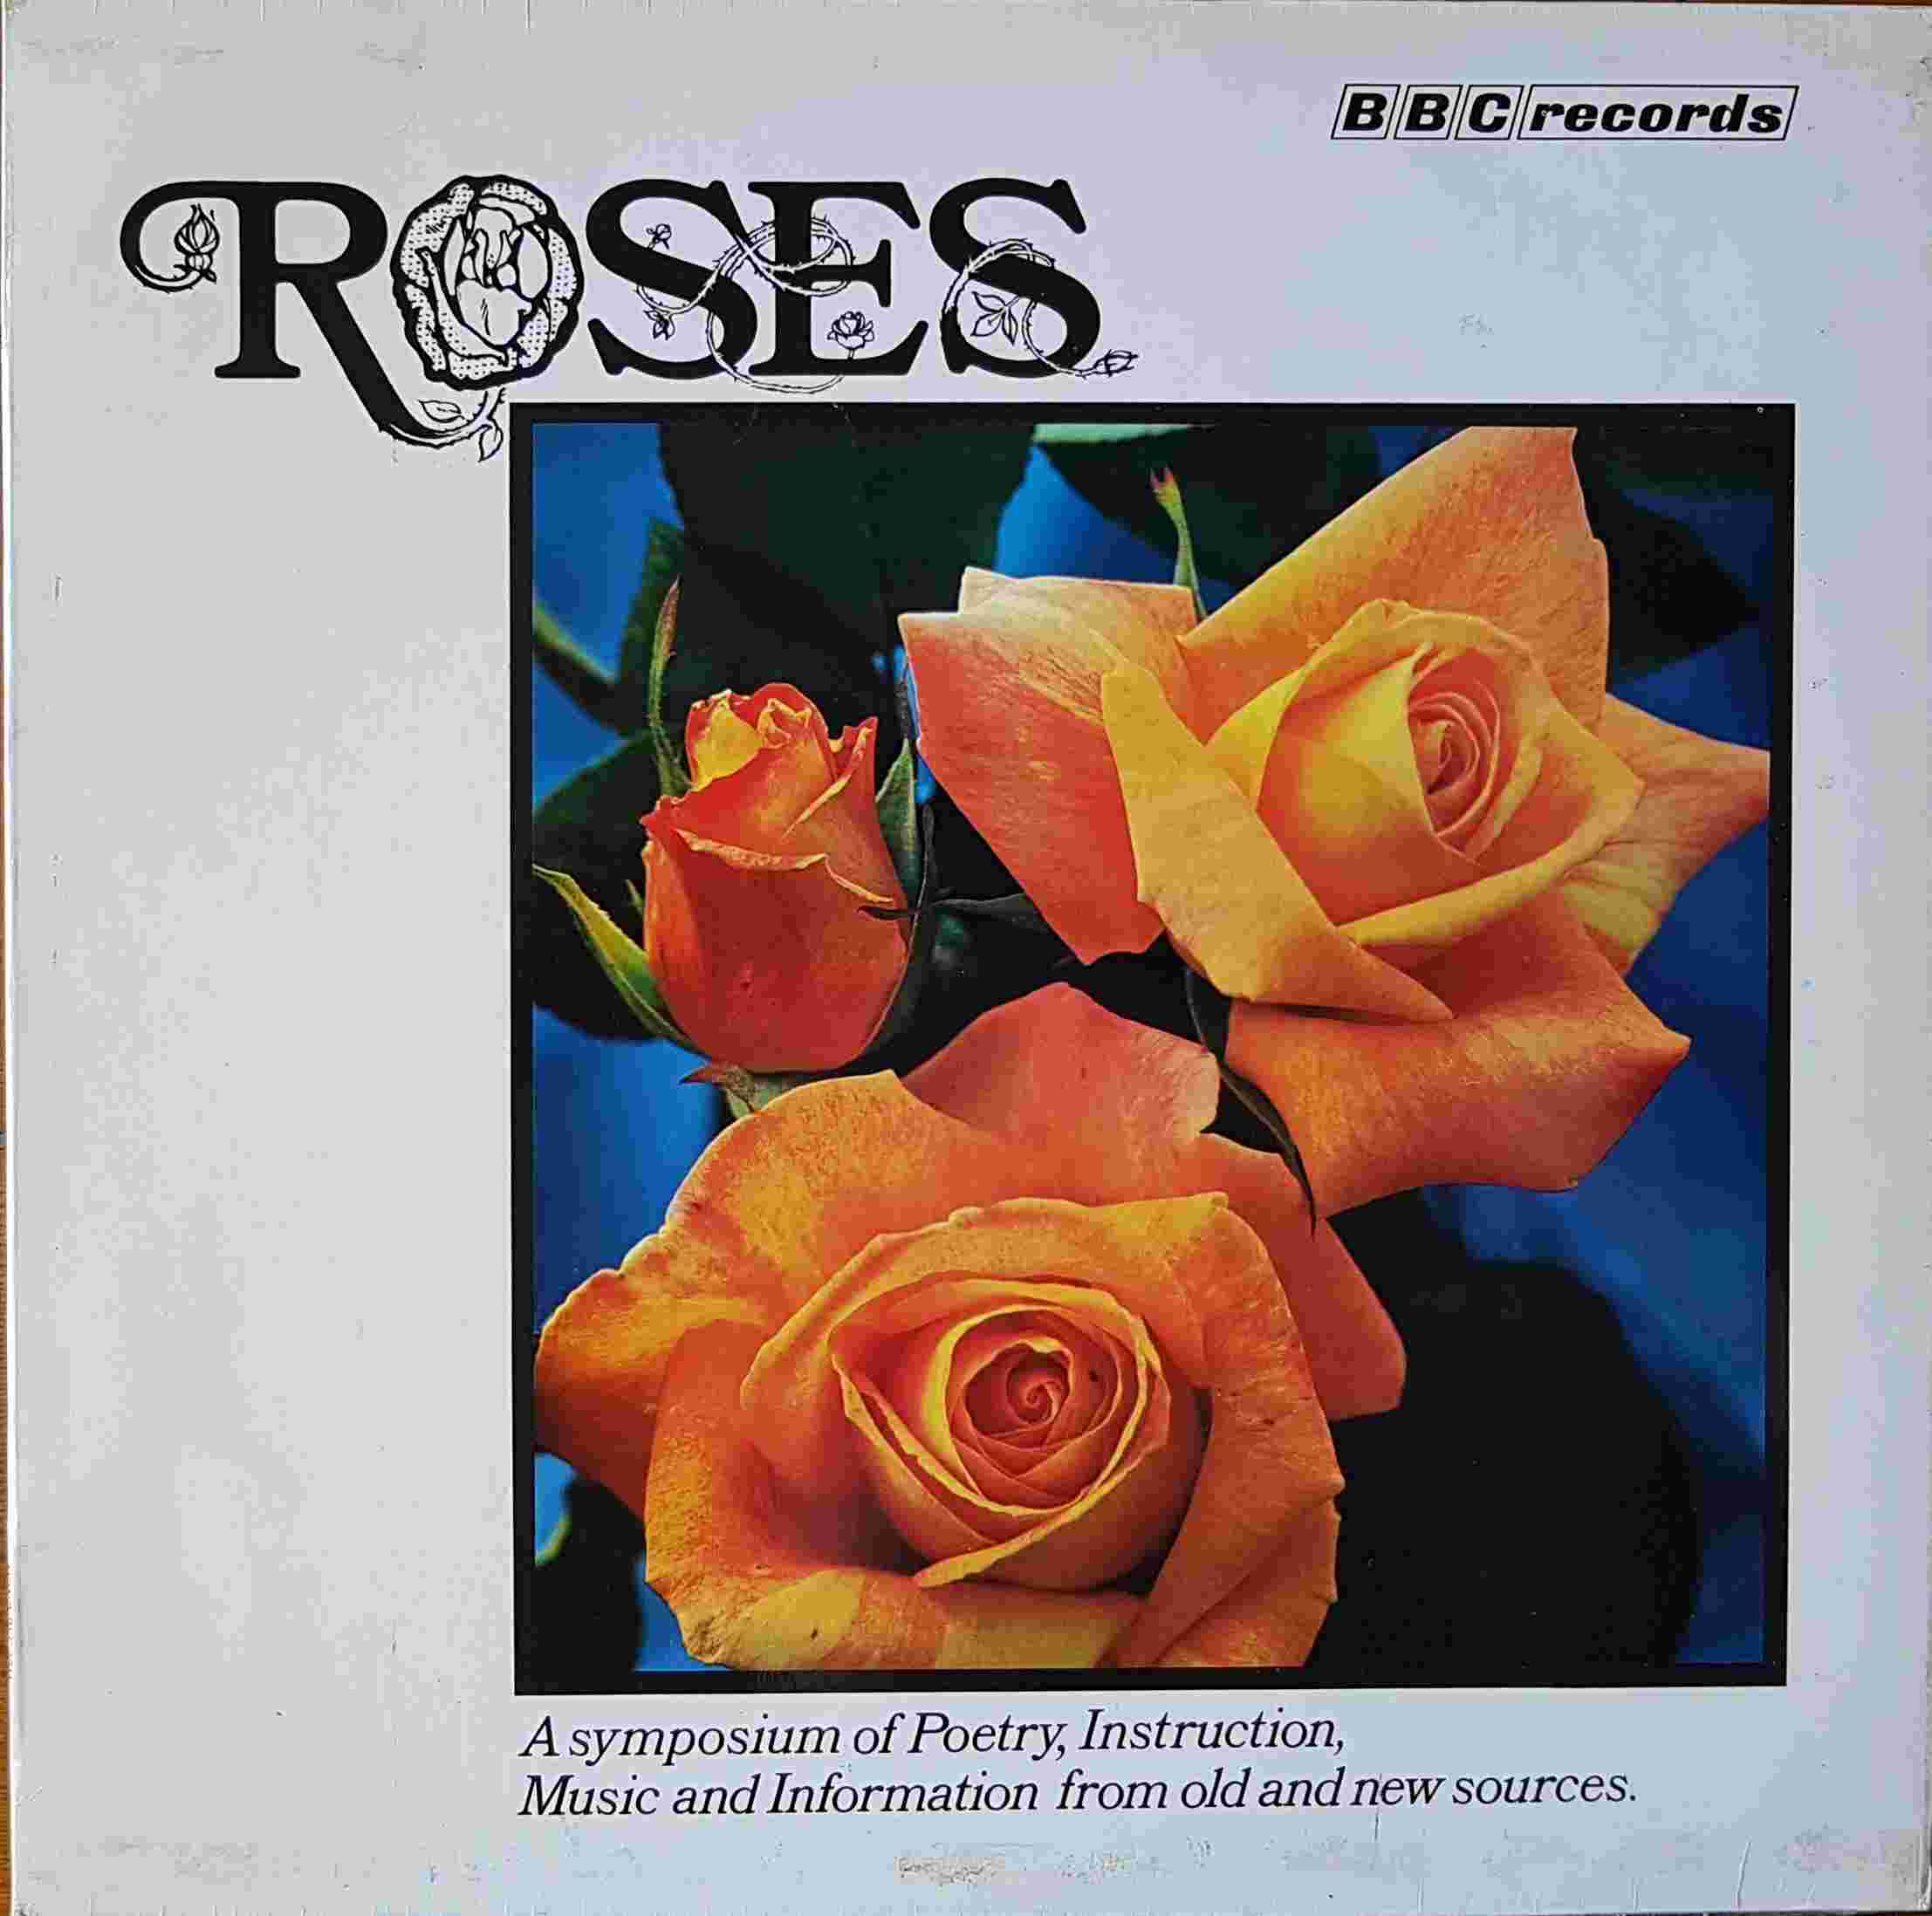 Picture of REC 99 Roses by artist Various from the BBC records and Tapes library